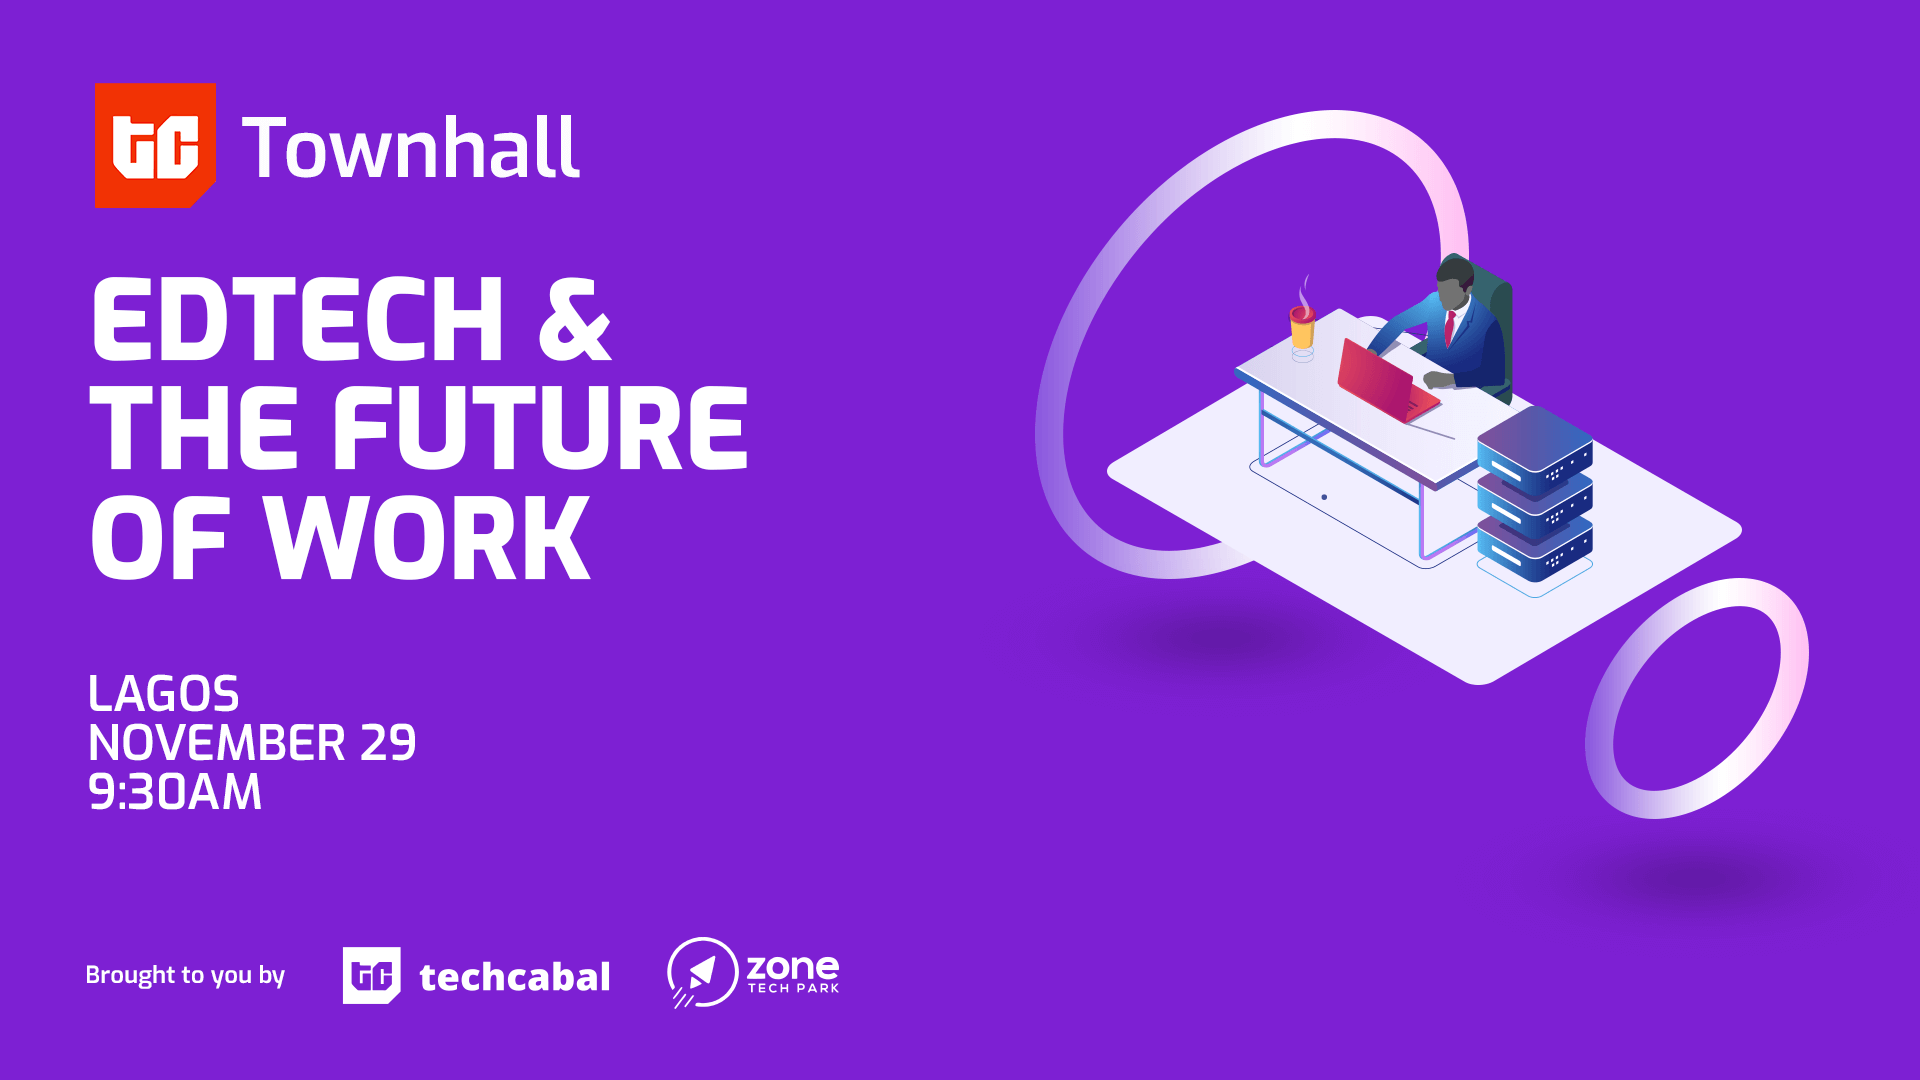 TechCabal's EdTech and Future of Work townhall holds November 29